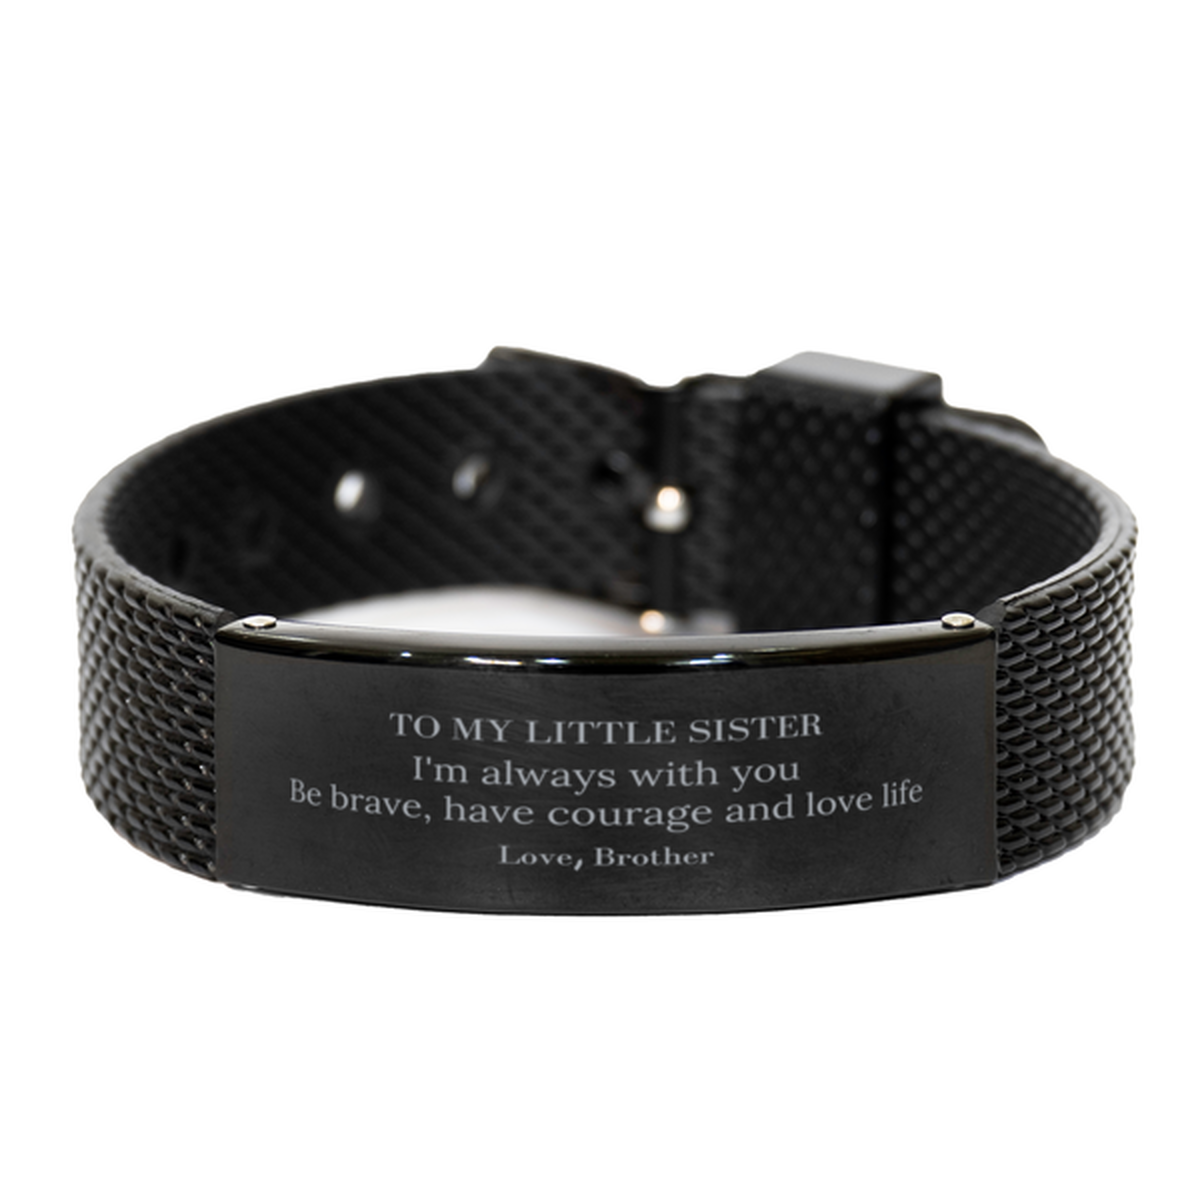 To My Little Sister Gifts from Brother, Unique Black Shark Mesh Bracelet Inspirational Christmas Birthday Graduation Gifts for Little Sister I'm always with you. Be brave, have courage and love life. Love, Brother